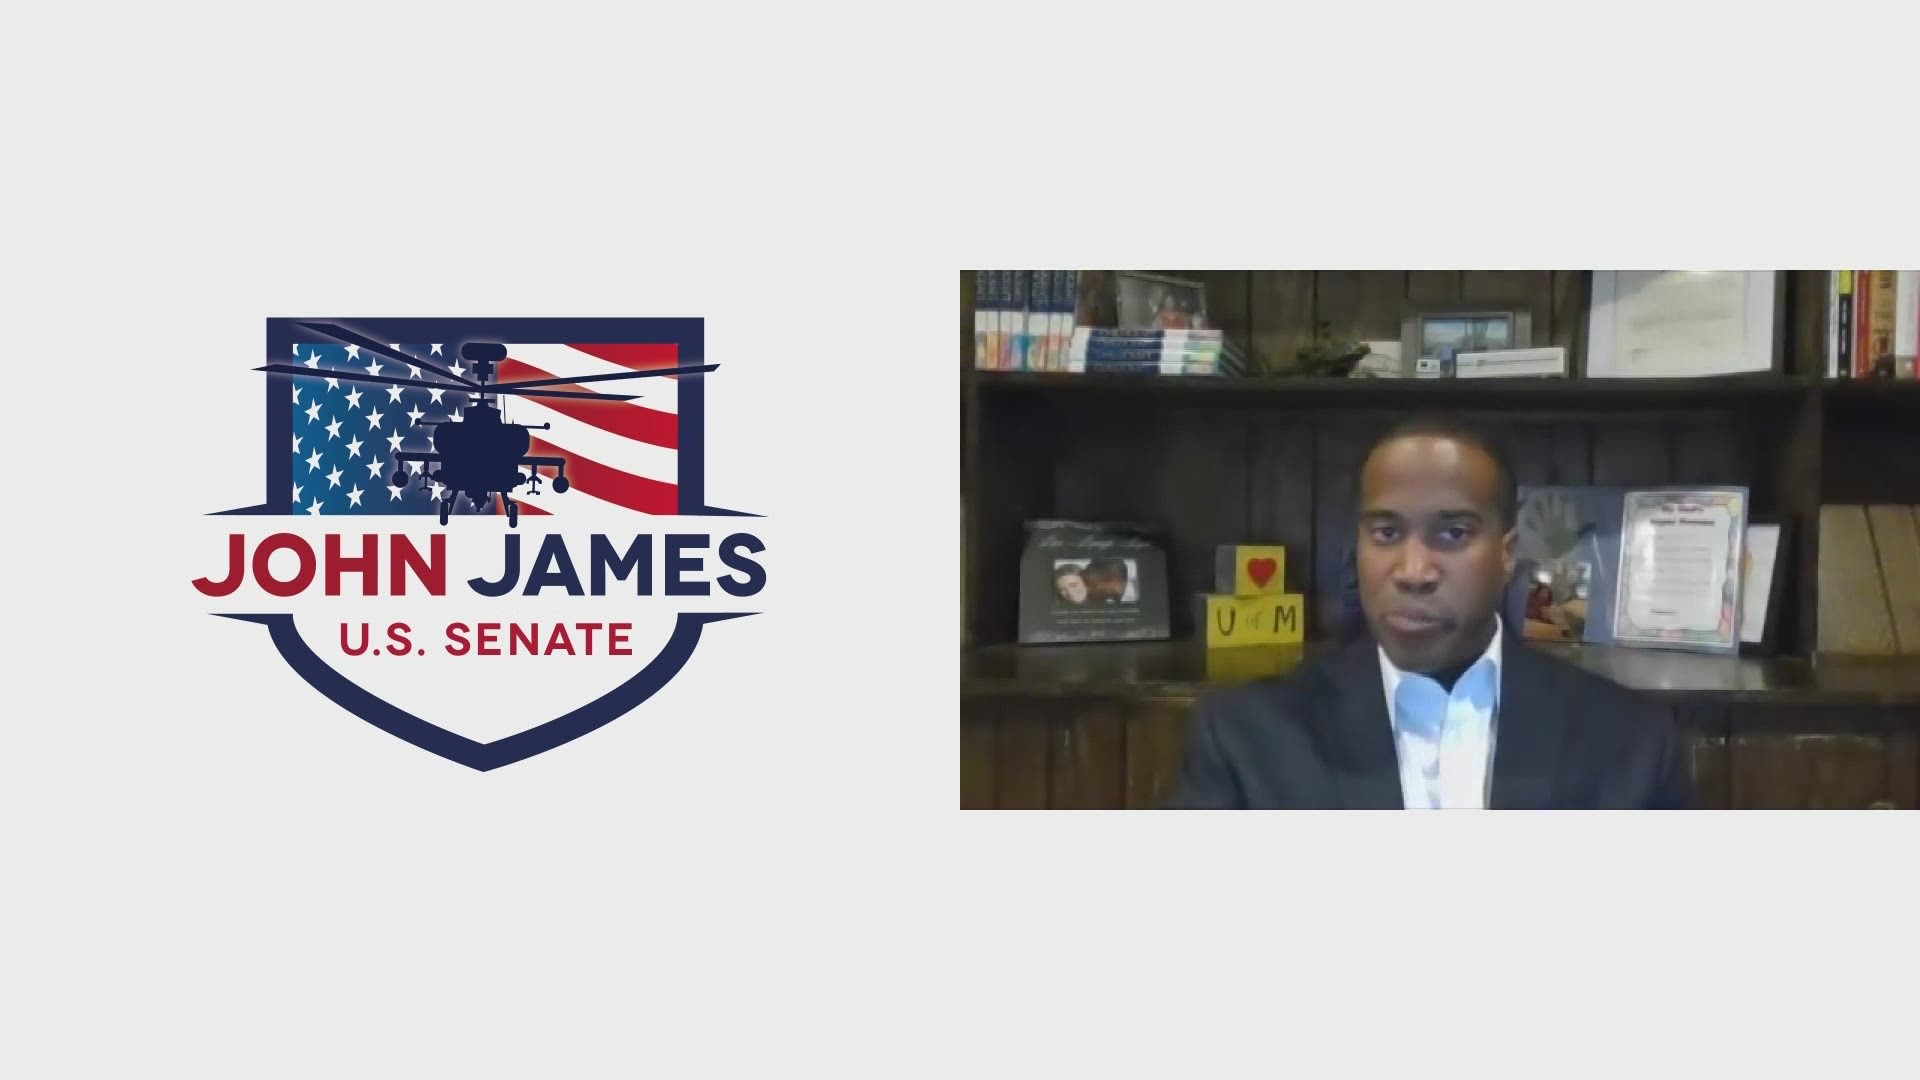 When asked about the lawsuit, which is being pushed by the Trump Administration, James said he does not support the move without a plan in place.